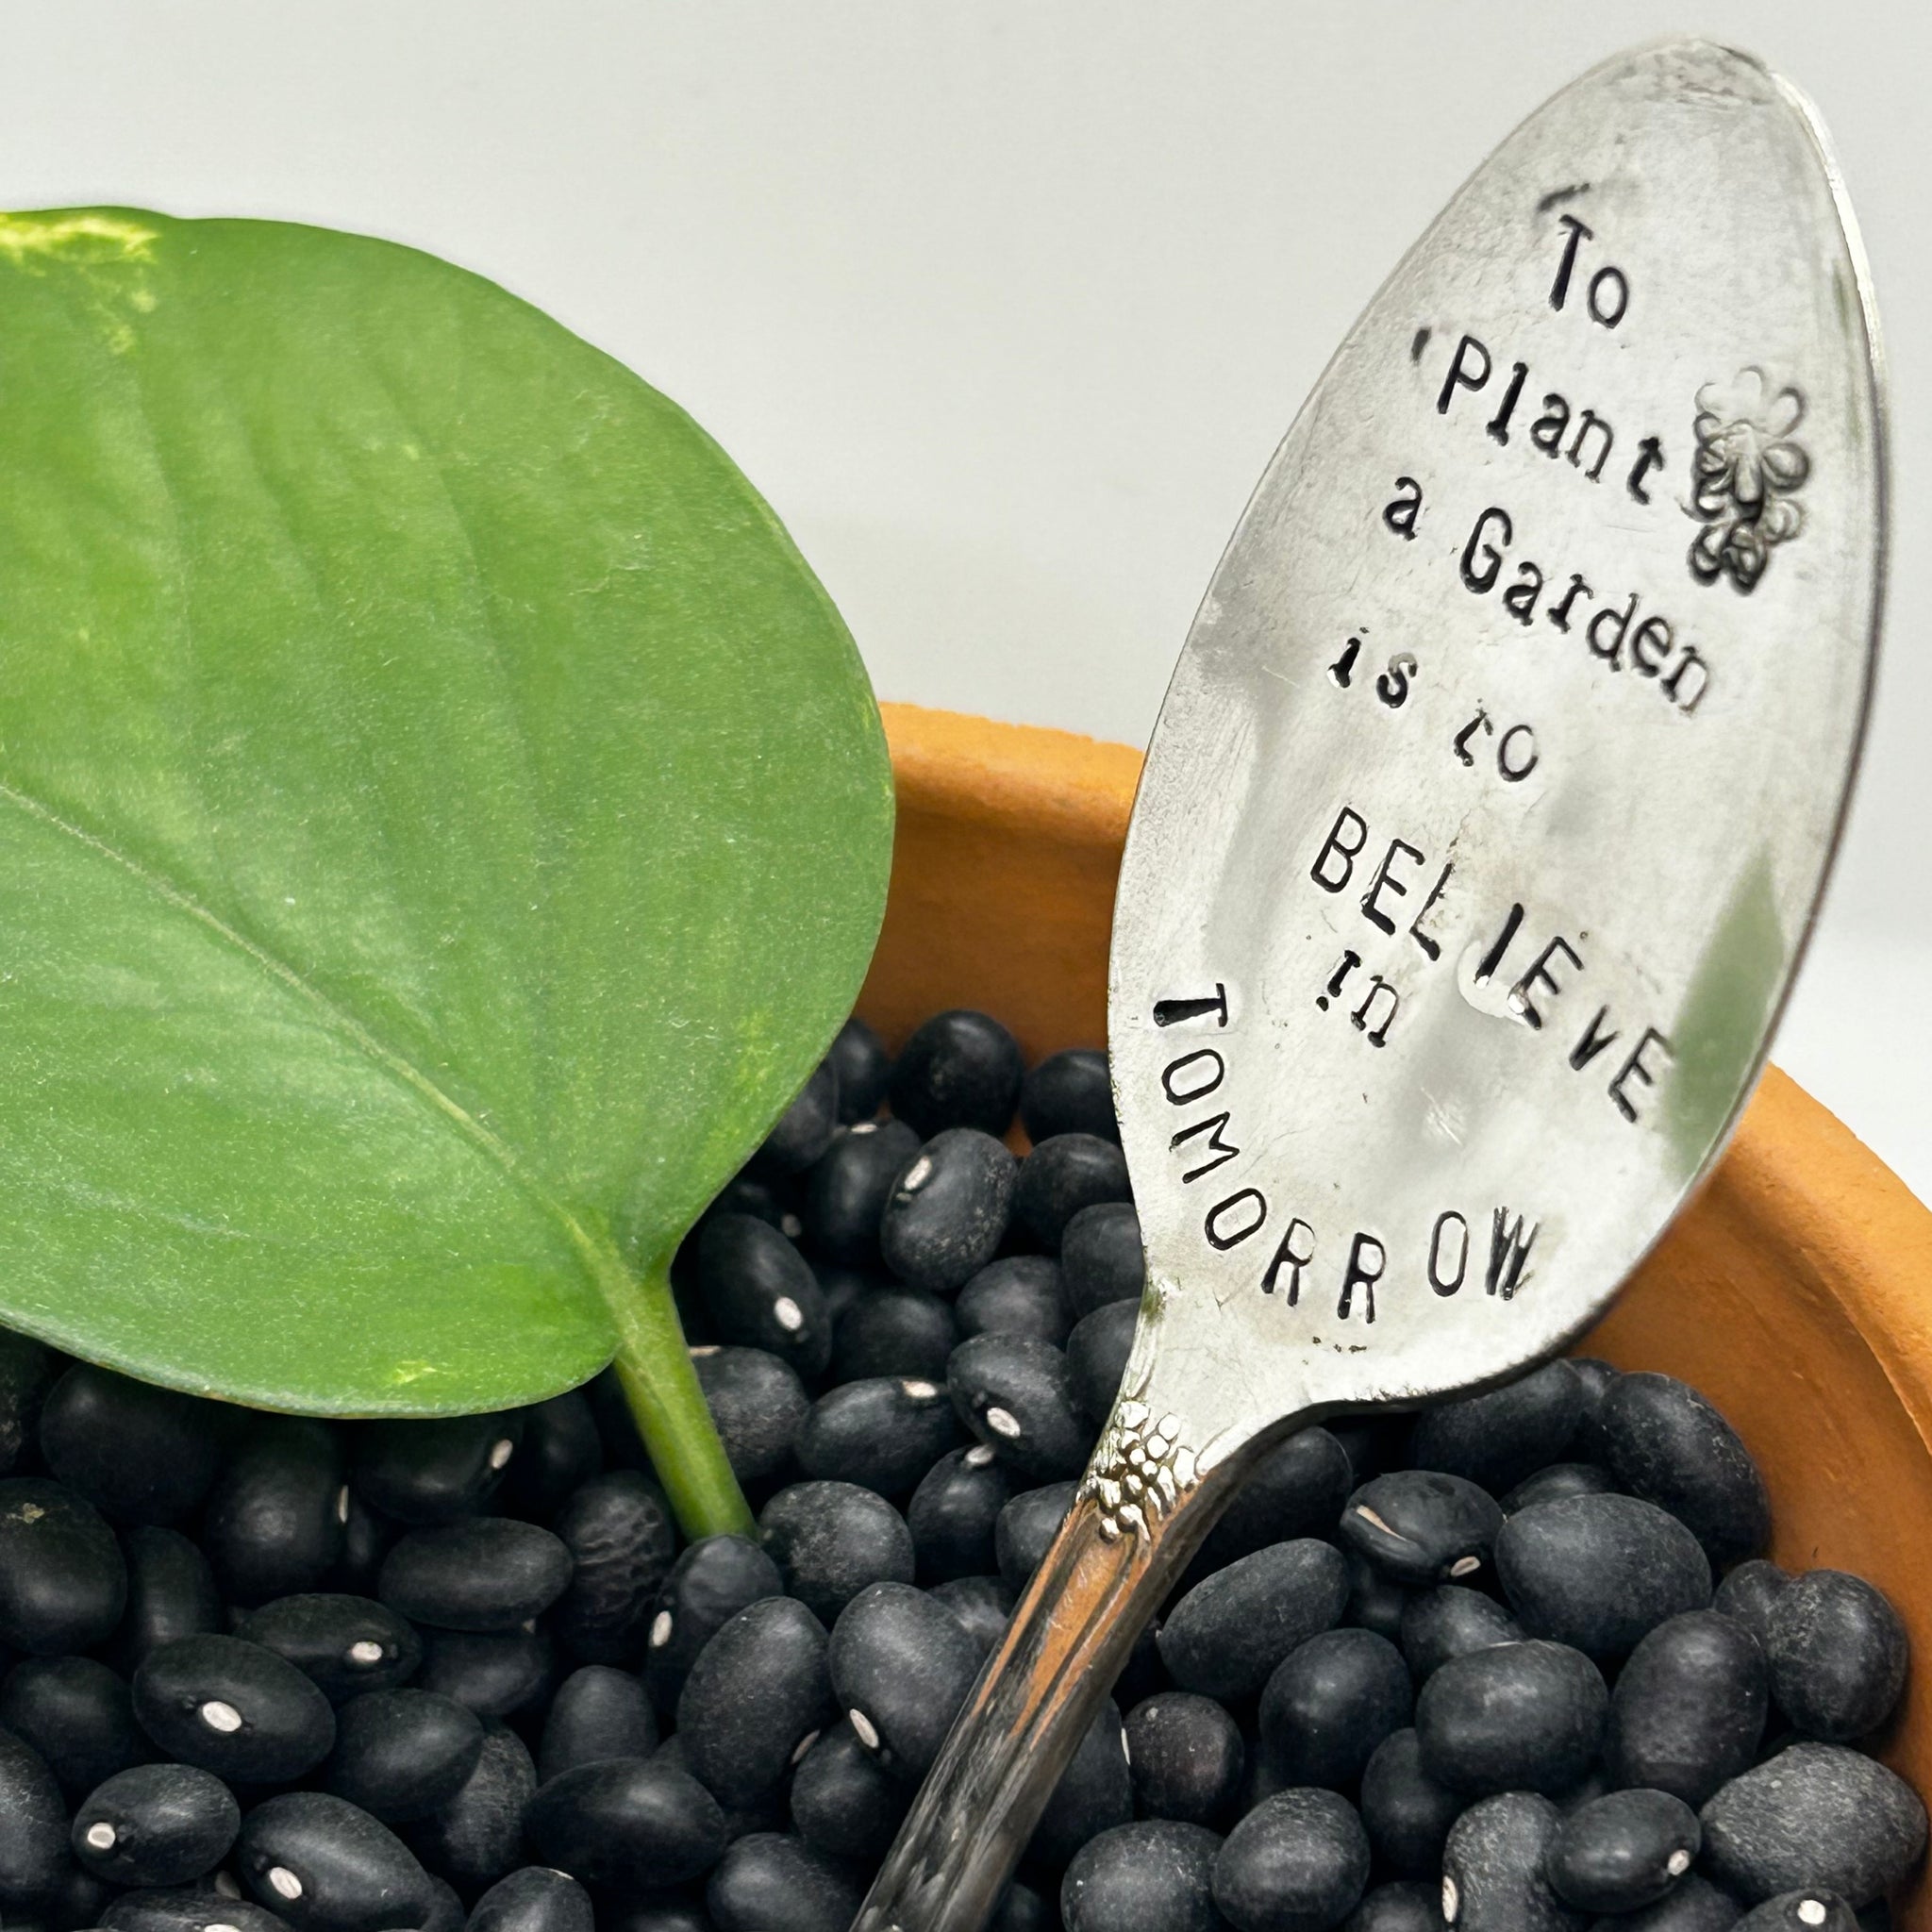 Plant Marker - To plant a garden is to believe in tomorrow